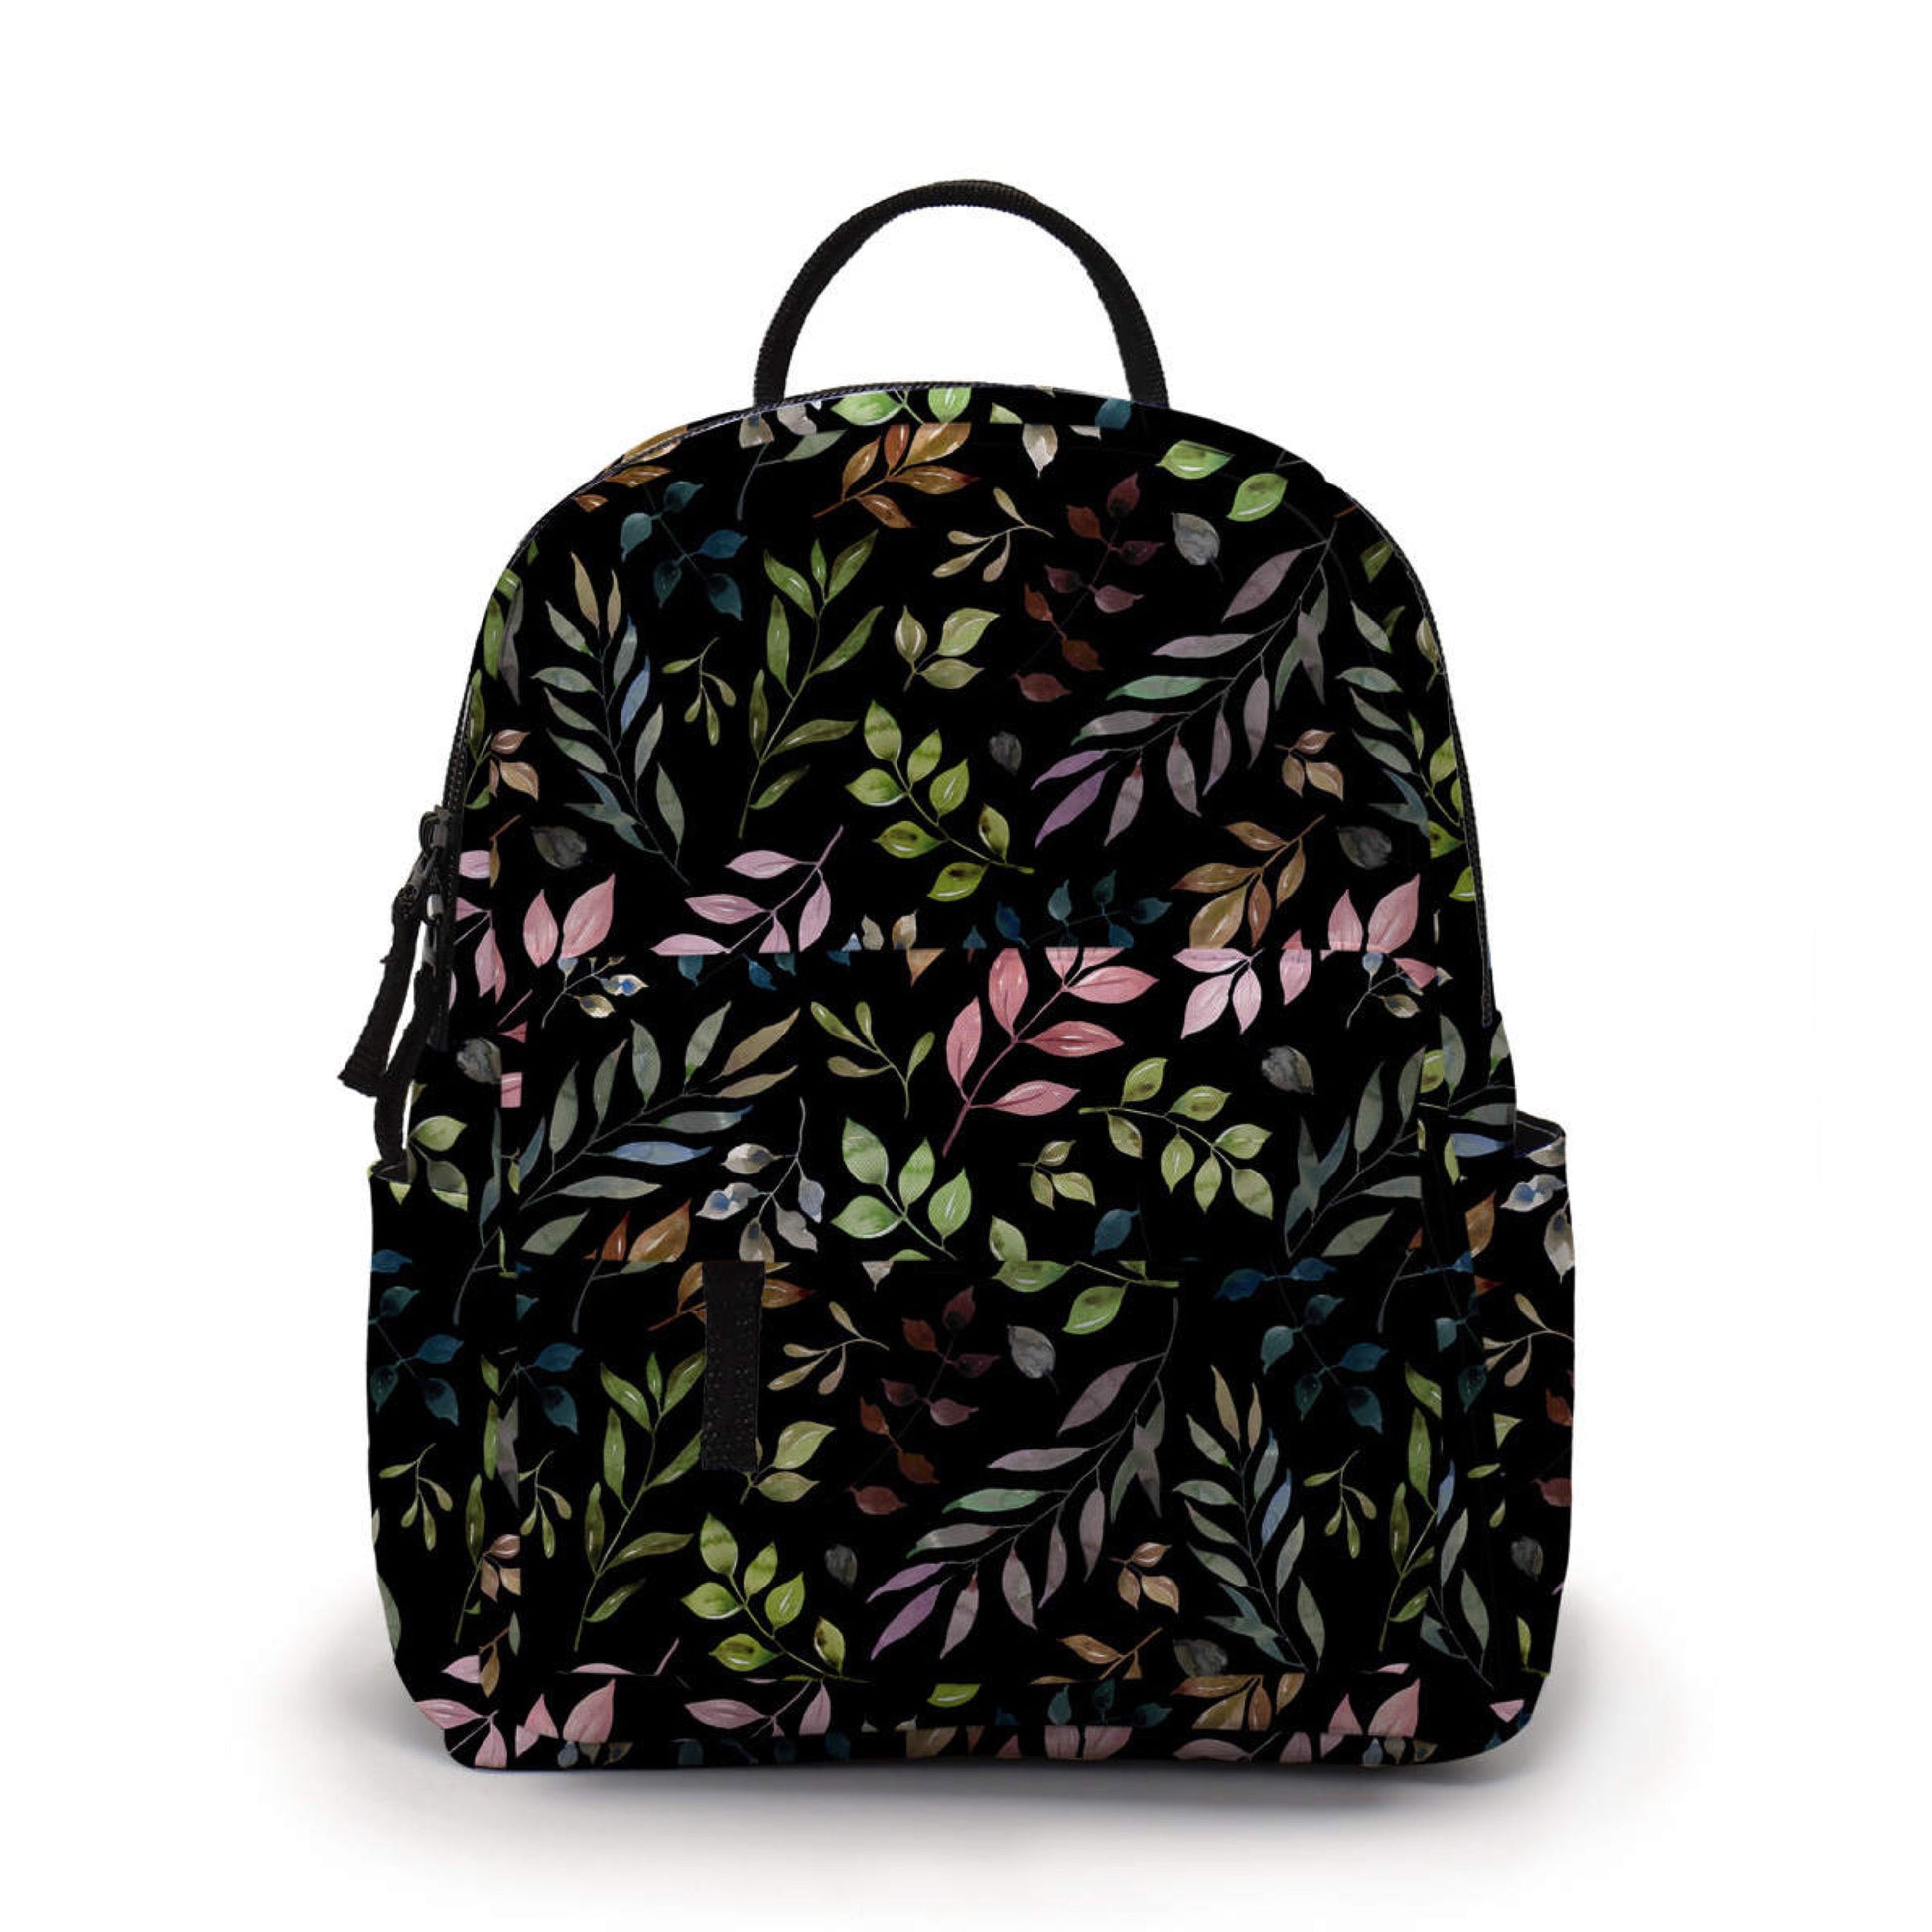 Mini Backpack - Floral Vines Black - Three Bears Boutique